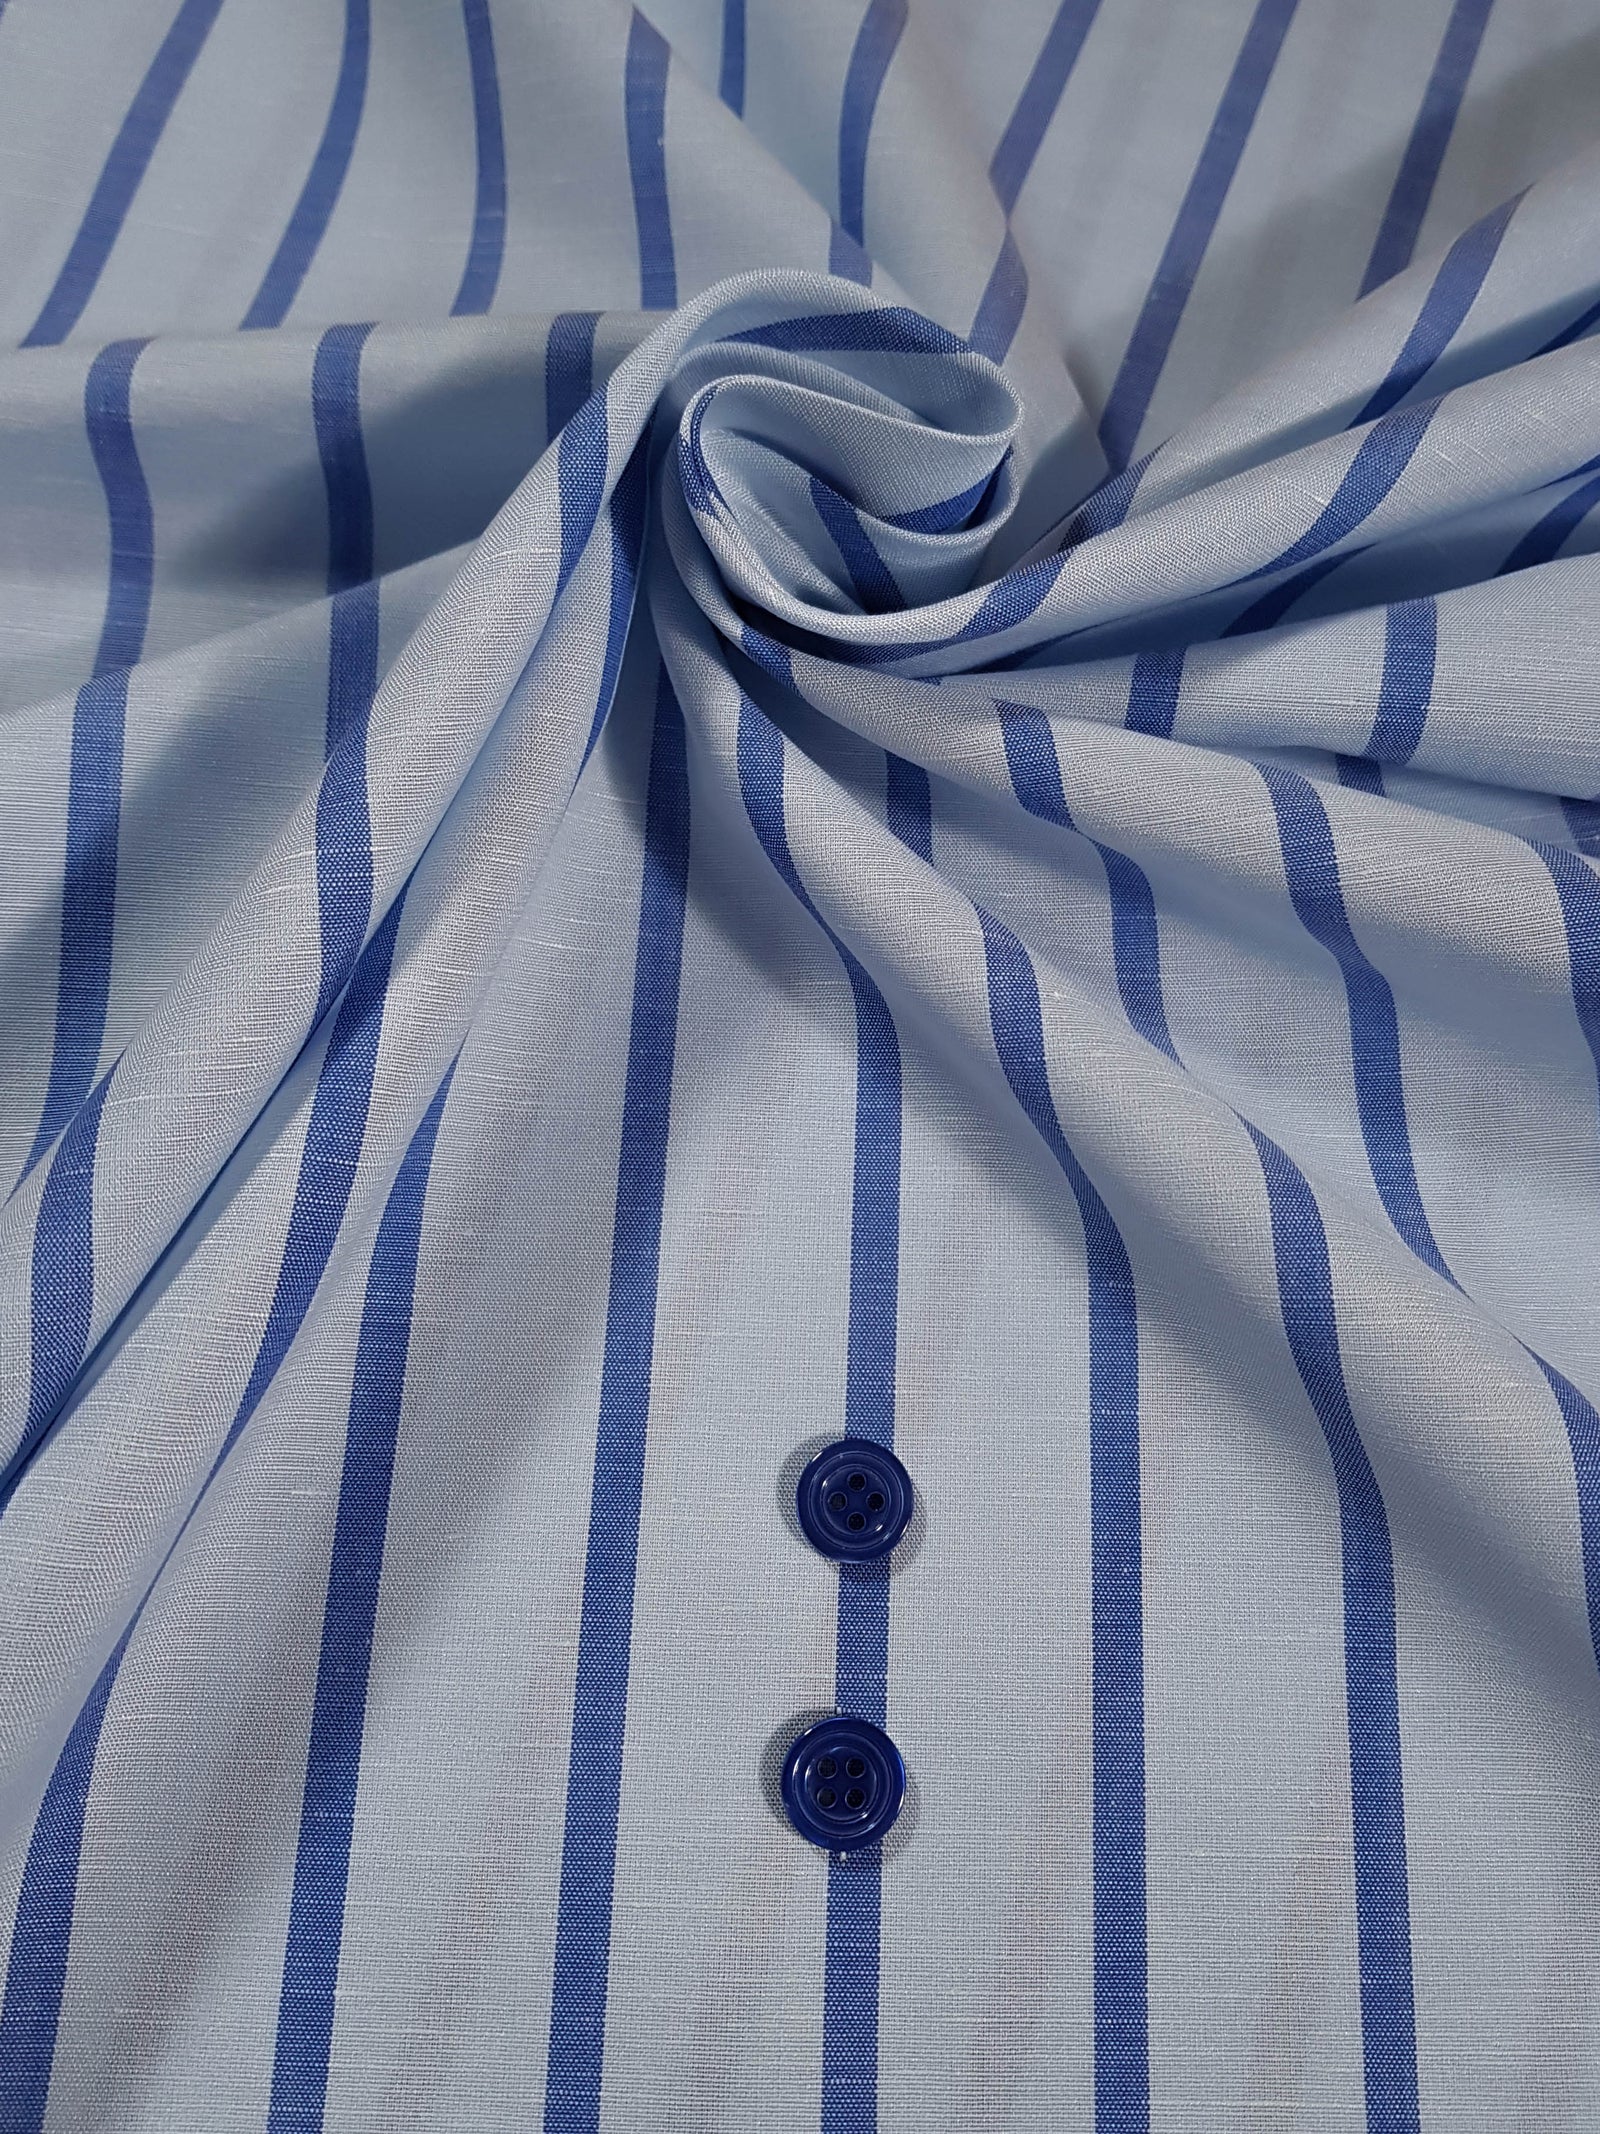 HUBERROSS Cotton Linen 70% Linen 30% Cotton  Cloth Made in Italy Width: 58'' / 150cm